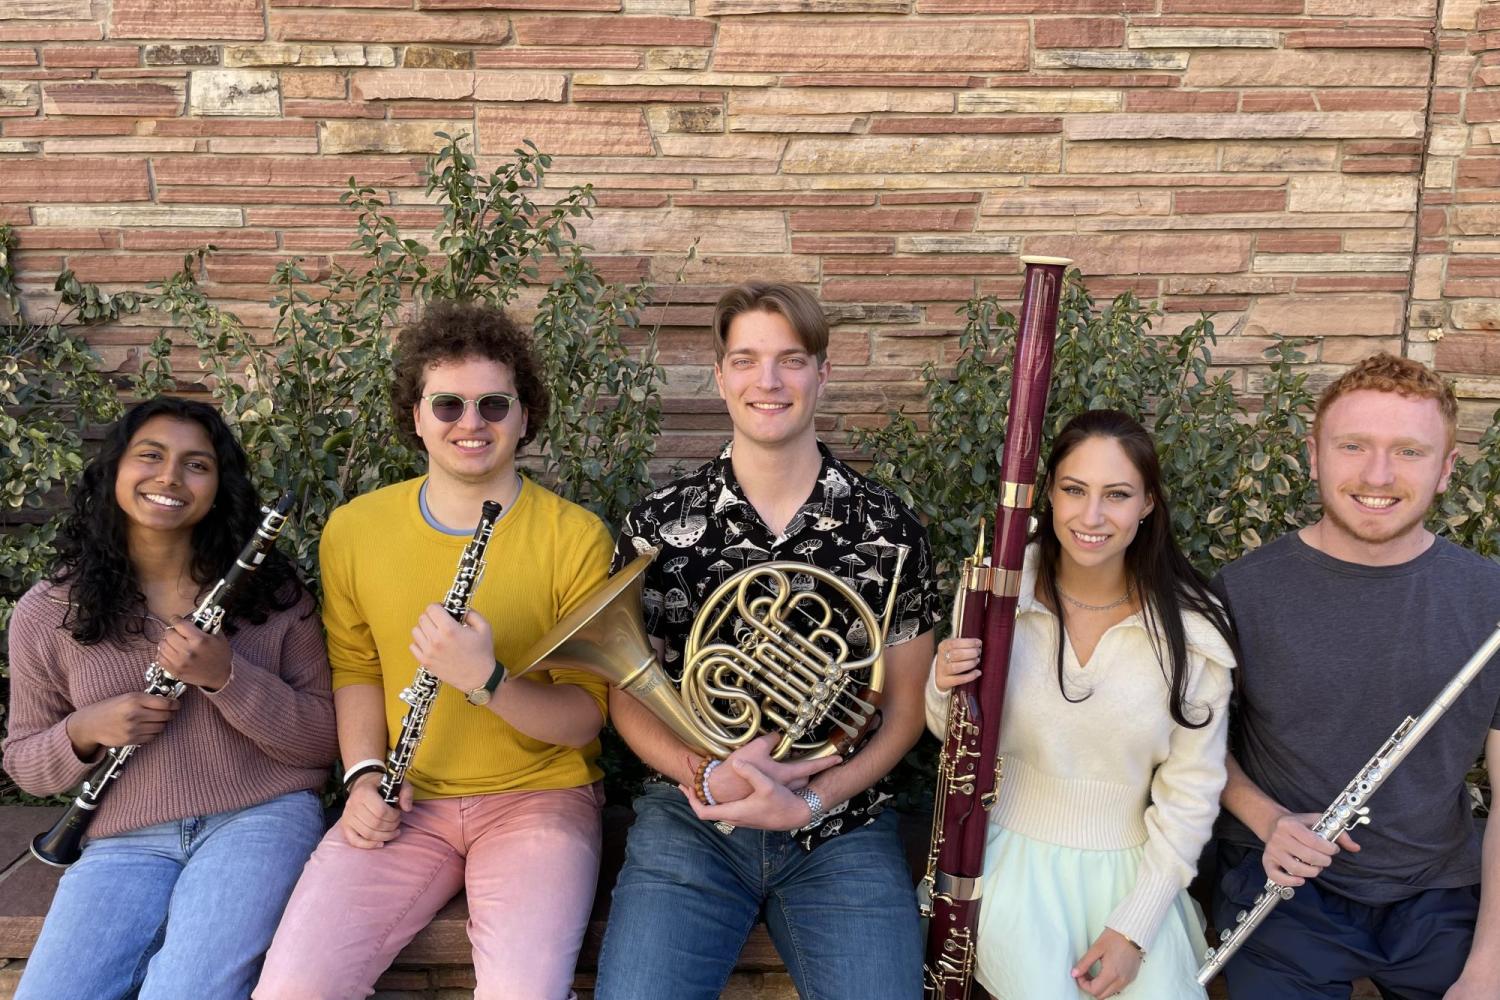 Five students seated outside of a red brick building, all holding different wind instruments.